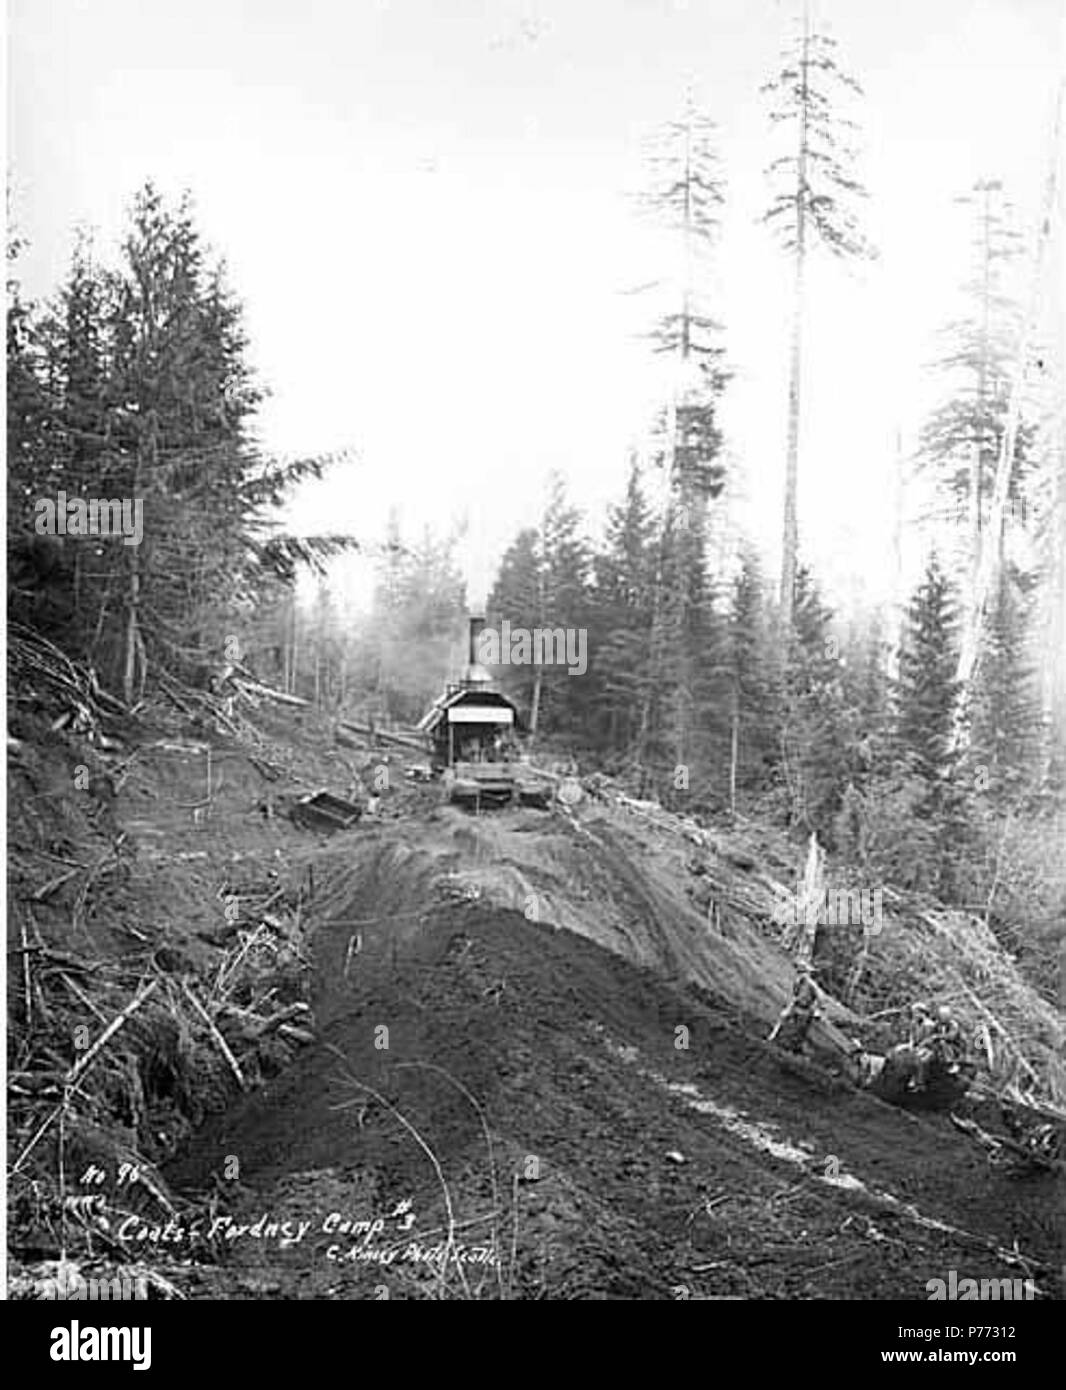 . English: Donkey engine at construction site, camp 3, Coats-Fordney Lumber Company, near Aberdeen, ca. 1920 . English: Caption on image: Coats-Fordney, Camp #3. C. Kinsey Photo, Seattle. No. 95 PH Coll 516.638 The Coats-Fordney Lumber Company started out as the A.F. Coats Lumber Company in 1905, headquartered in Aberdeen. It became the Coats-Fordney Lumber Company in 1910, and by 1924, it was called the Donovan-Corkery Lumber Company. Aberdeen is a city in Grays Harbor (formerly called Chehalis) County. The town was platted by Samuel Benn in 1884 on his homestead. Benn was born in New York Ci Stock Photo